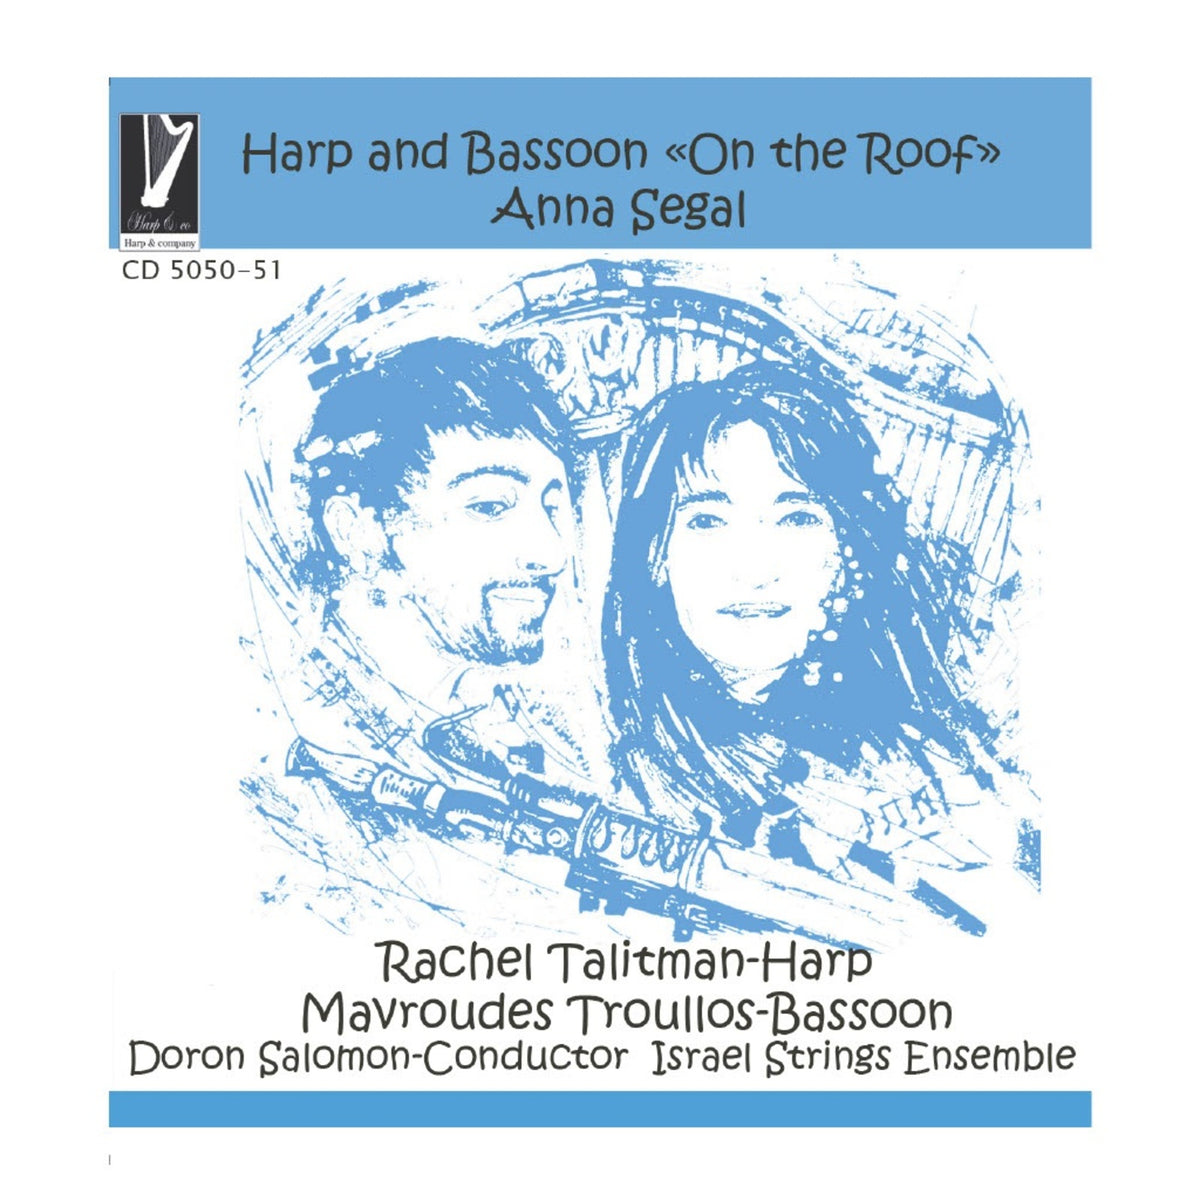 Rachel Talitman & Mavroudes Troullos - Harp and Bassoon "On the Roof" - Music by Anna Segal - CD505051